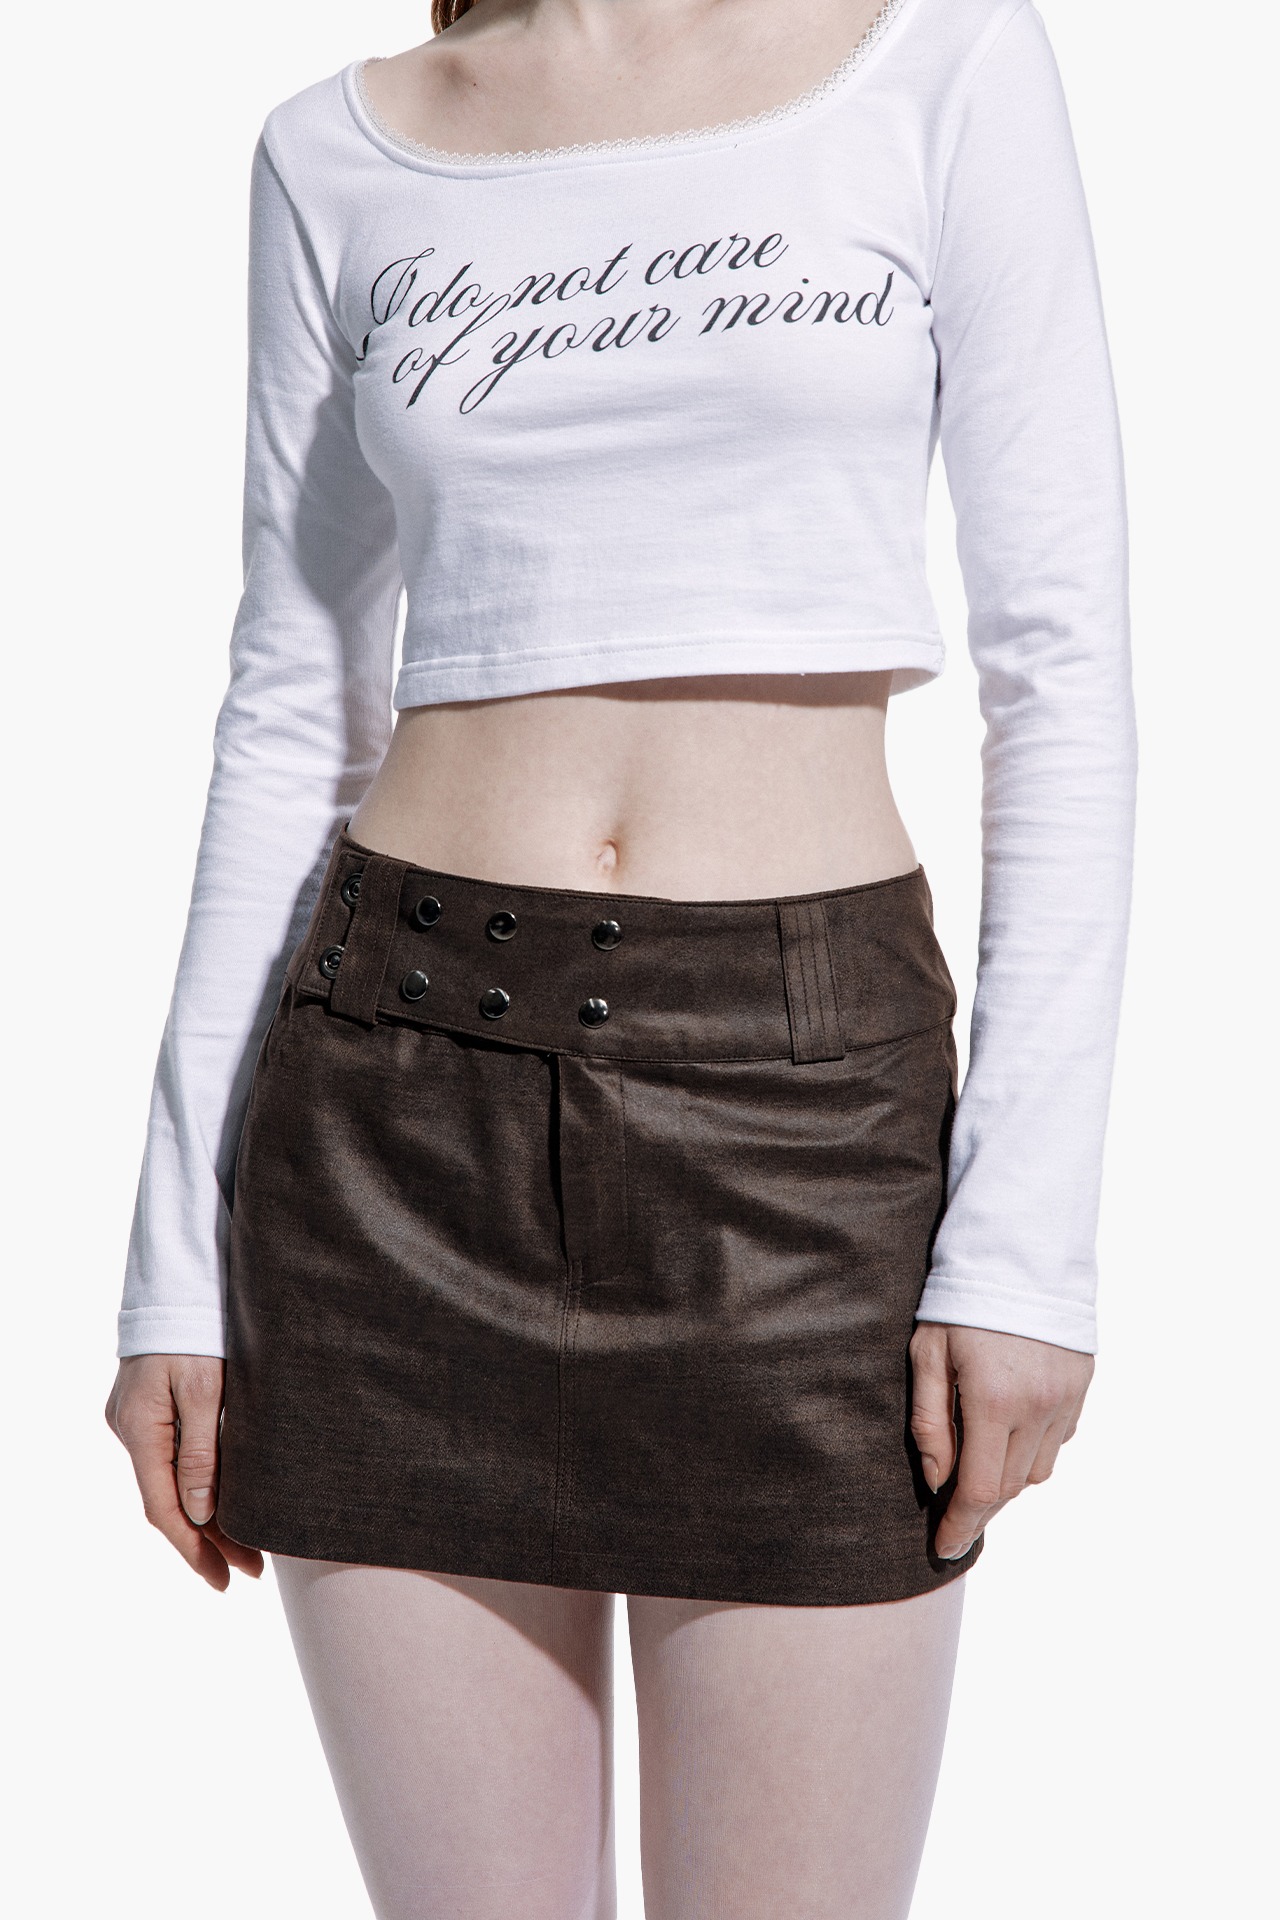 LOW-RISE VINTAGE LEATHER SKIRT BROWN